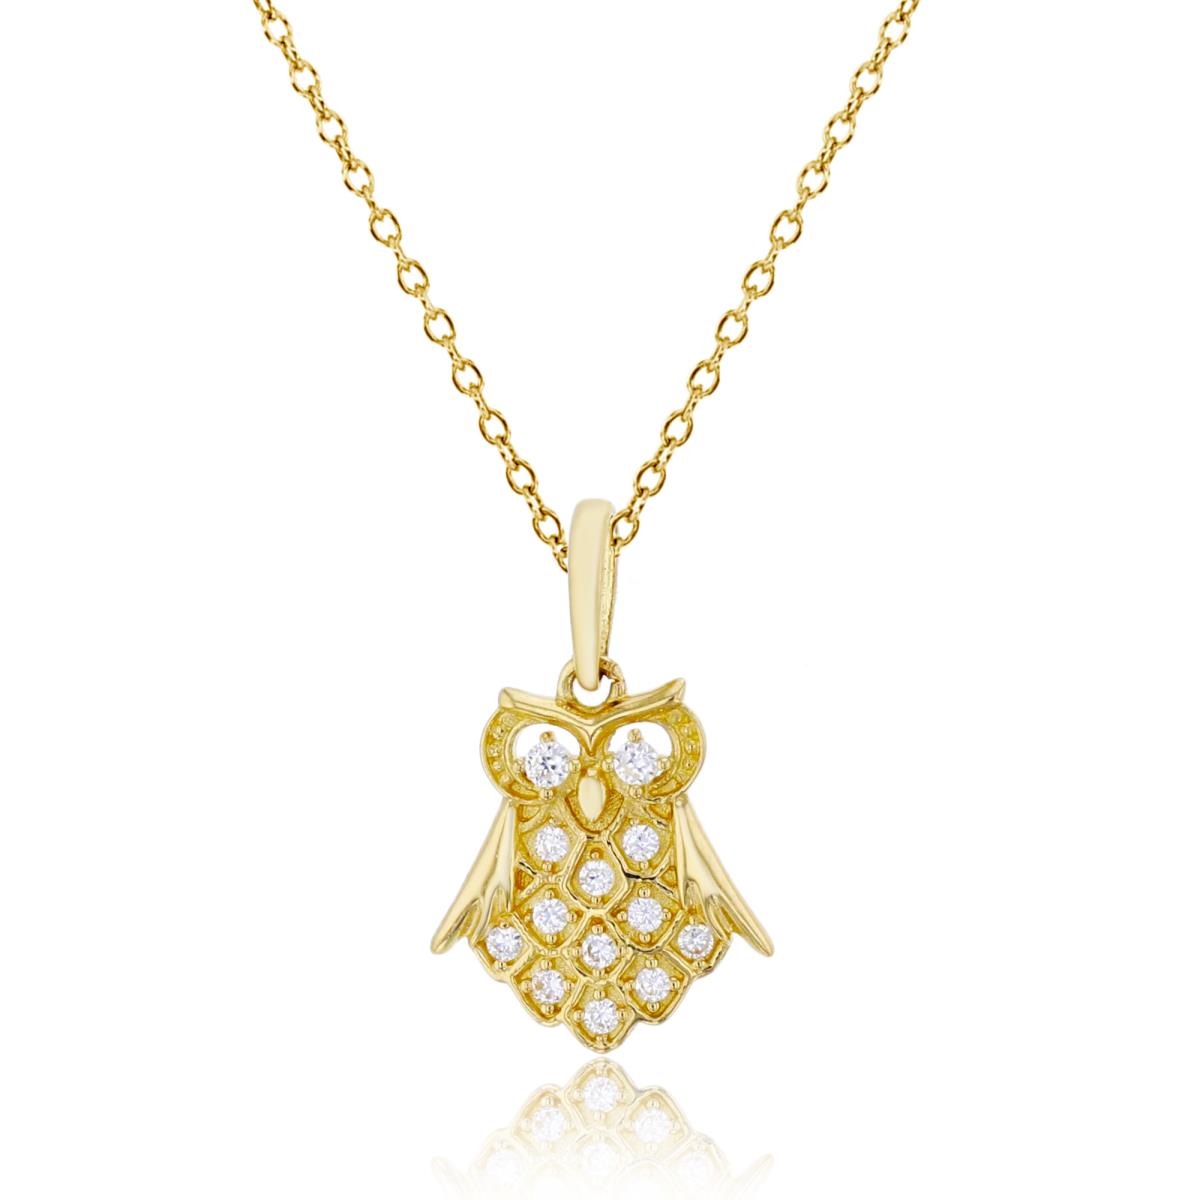 10K Yellow Gold Micropave CZ Owl 18" Necklace